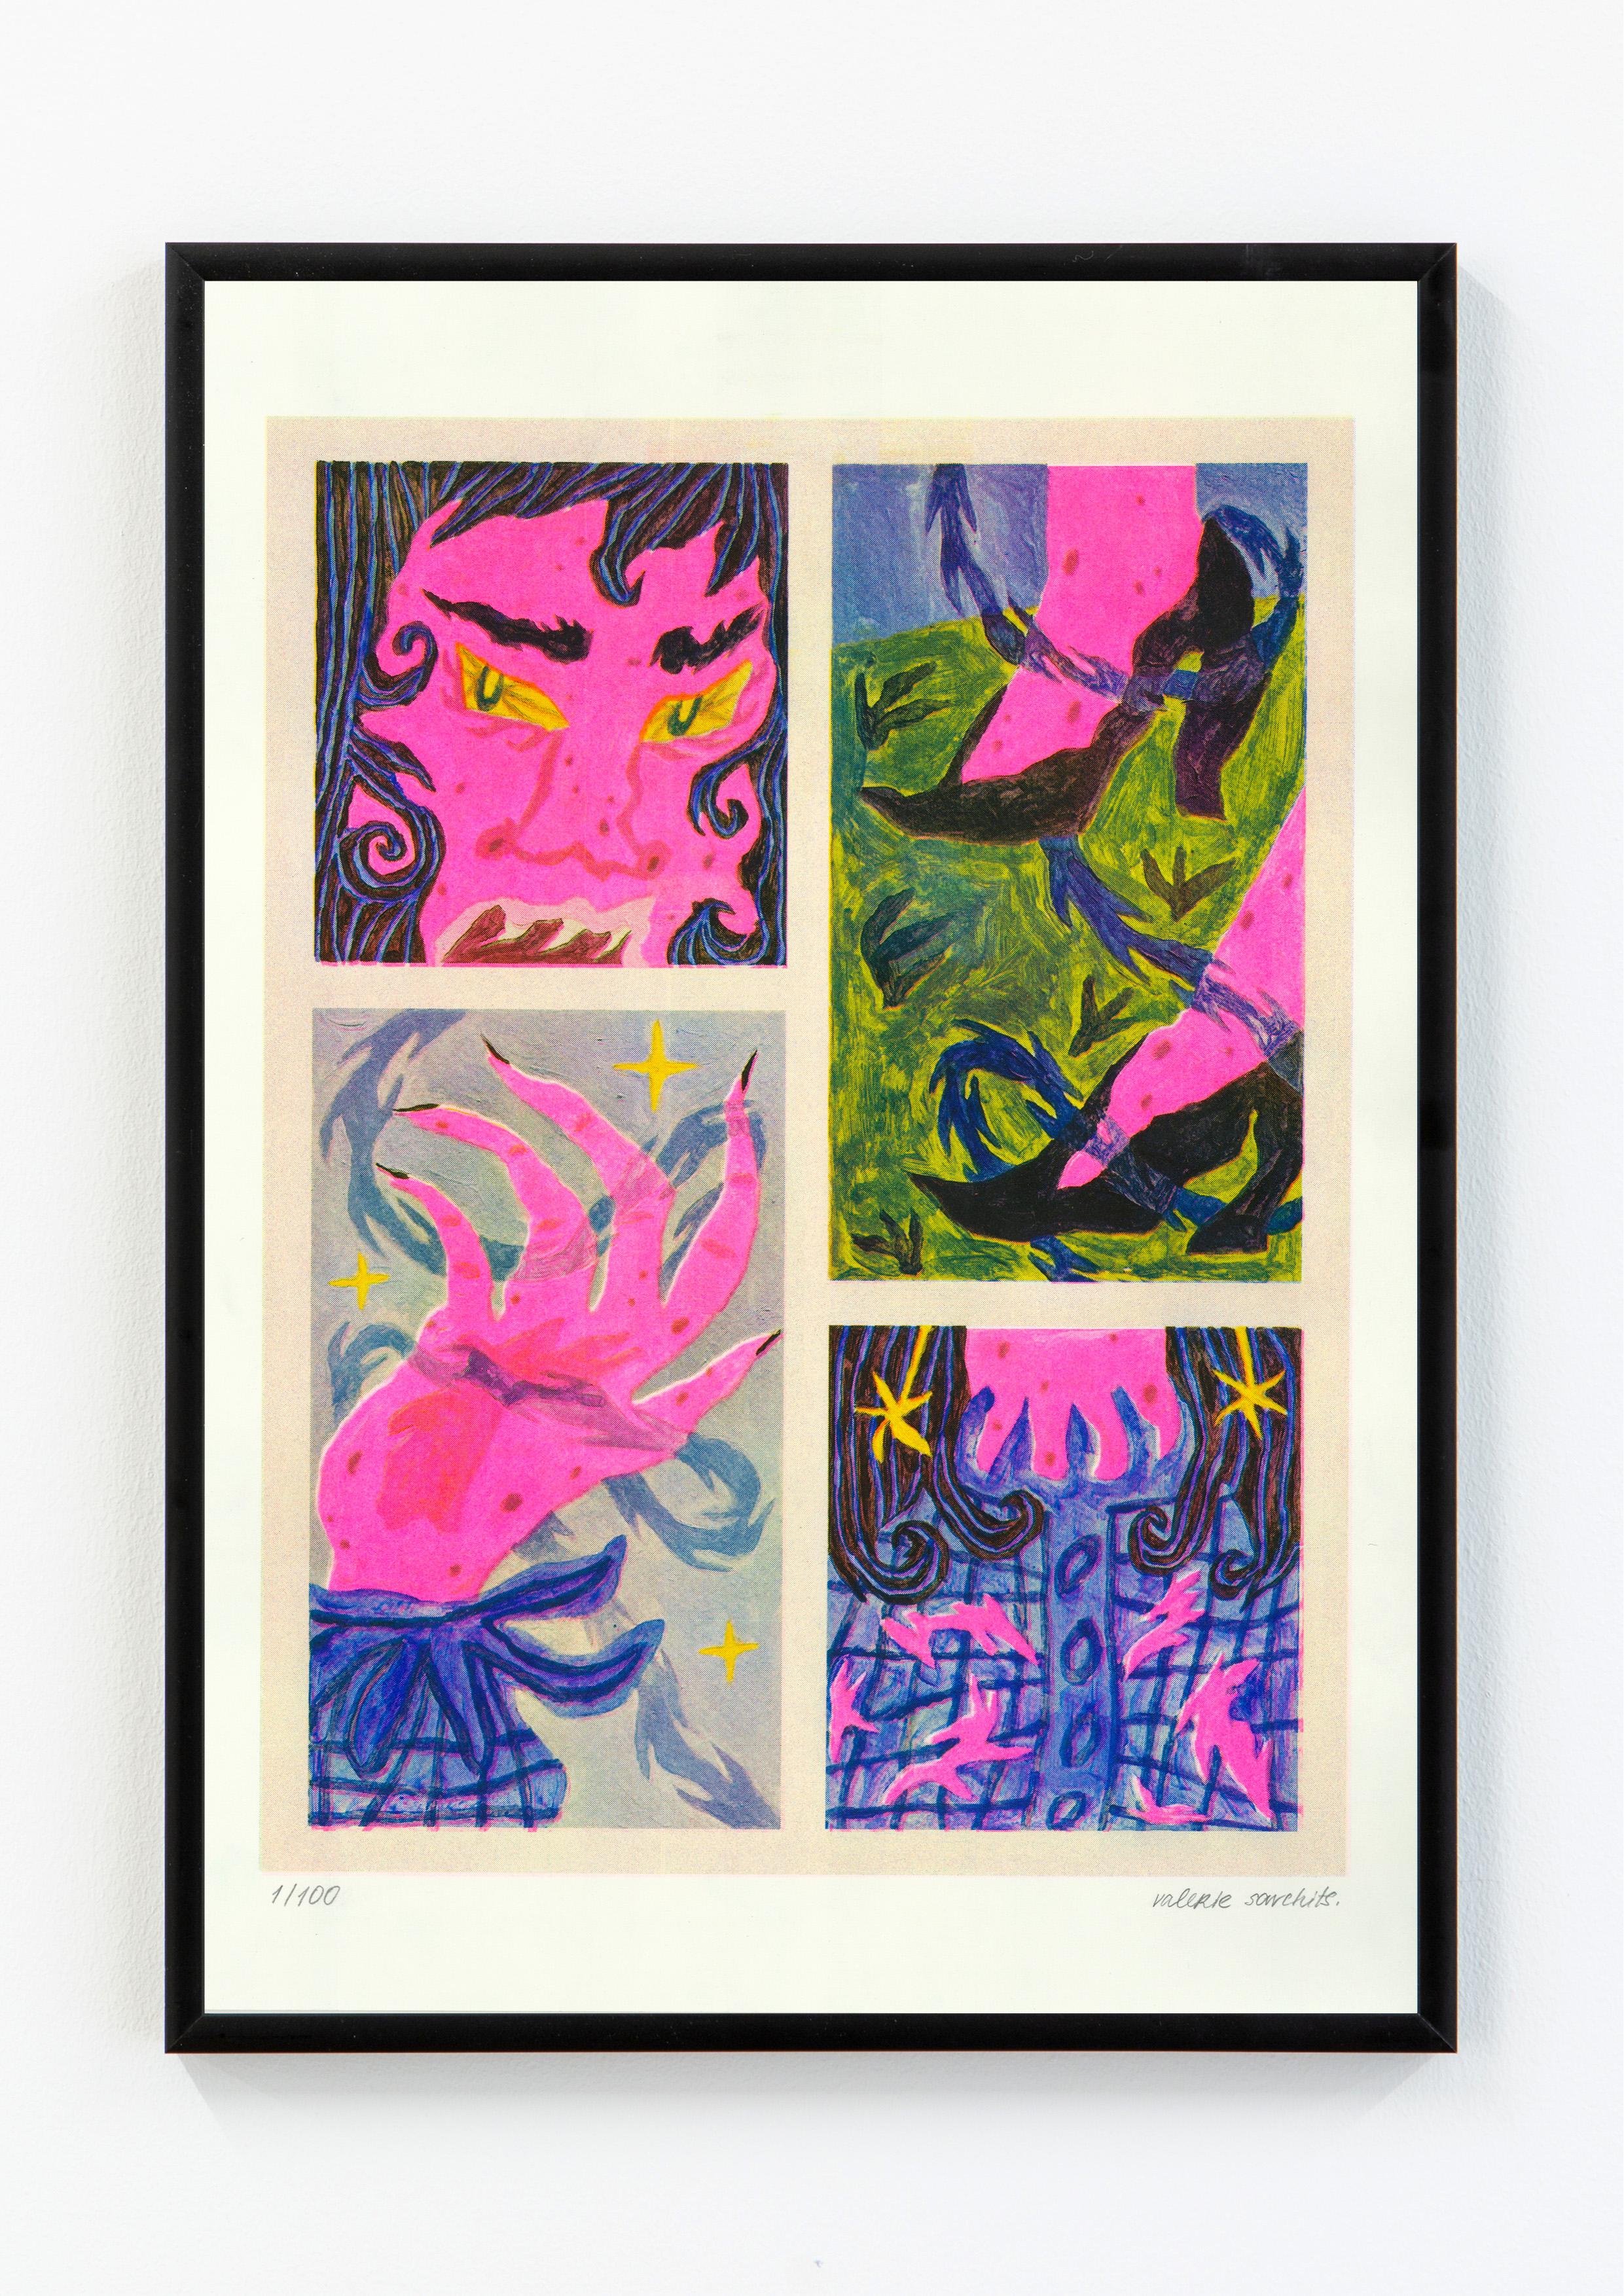 Valerie Savchits

I Say No, 2021

Risograph print on Olin natural white 170gsm paper

42 x 29.7 cm (A3)

Edition of 100

Signed and numbered by the artist

Sold unframed

“Sometimes, being afraid of confrontation and avoiding trouble today, we often